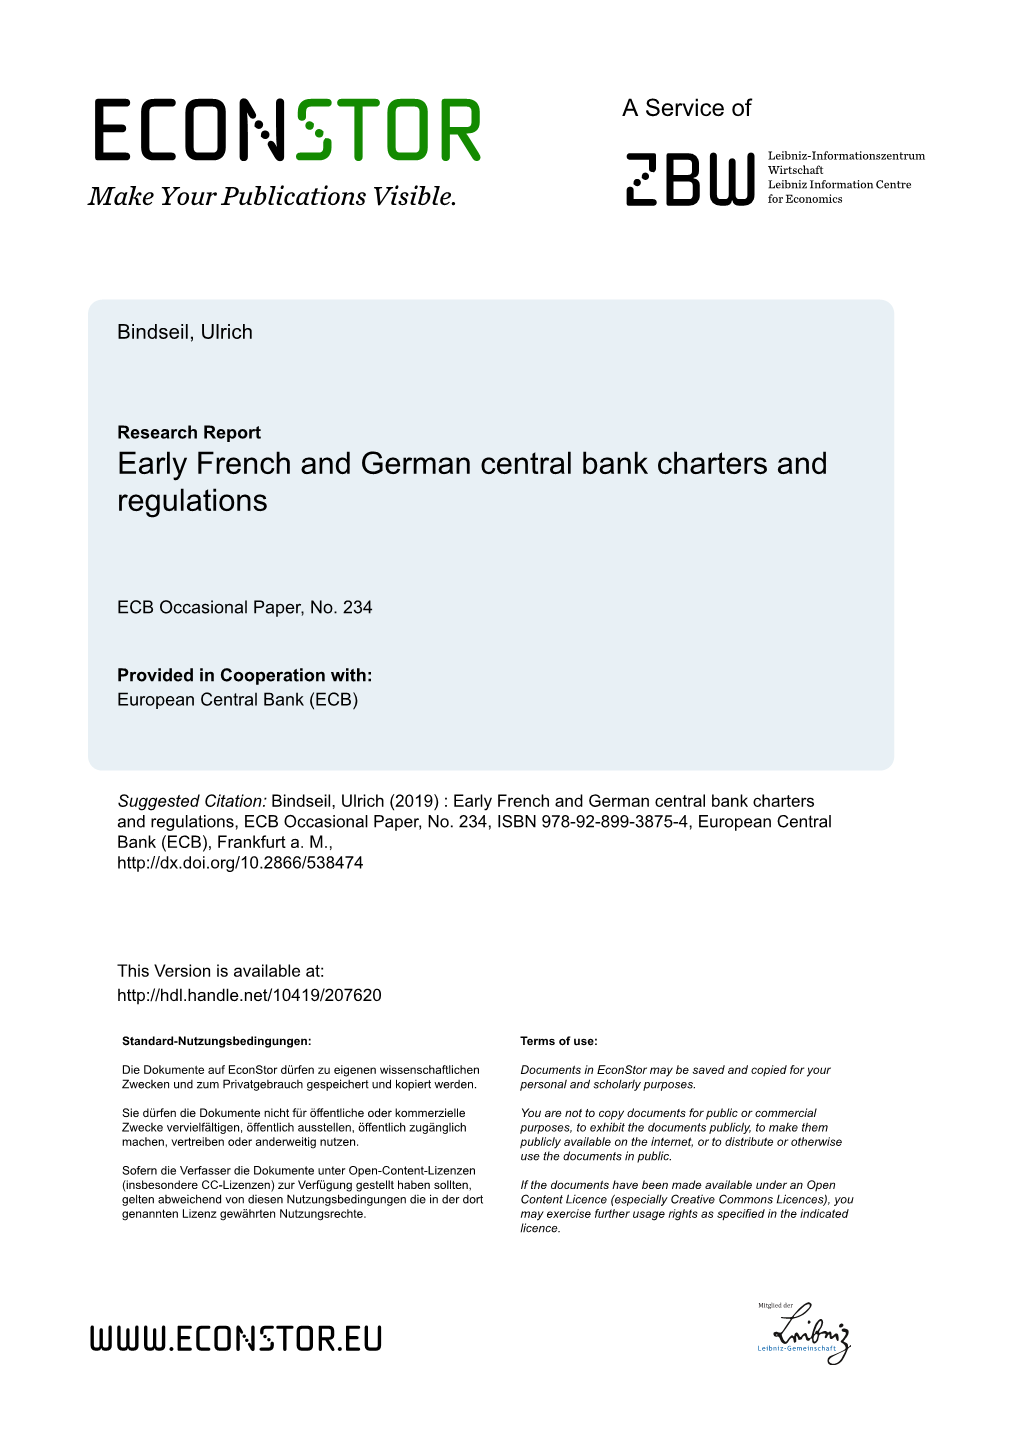 Early French and German Central Bank Charters and Regulations